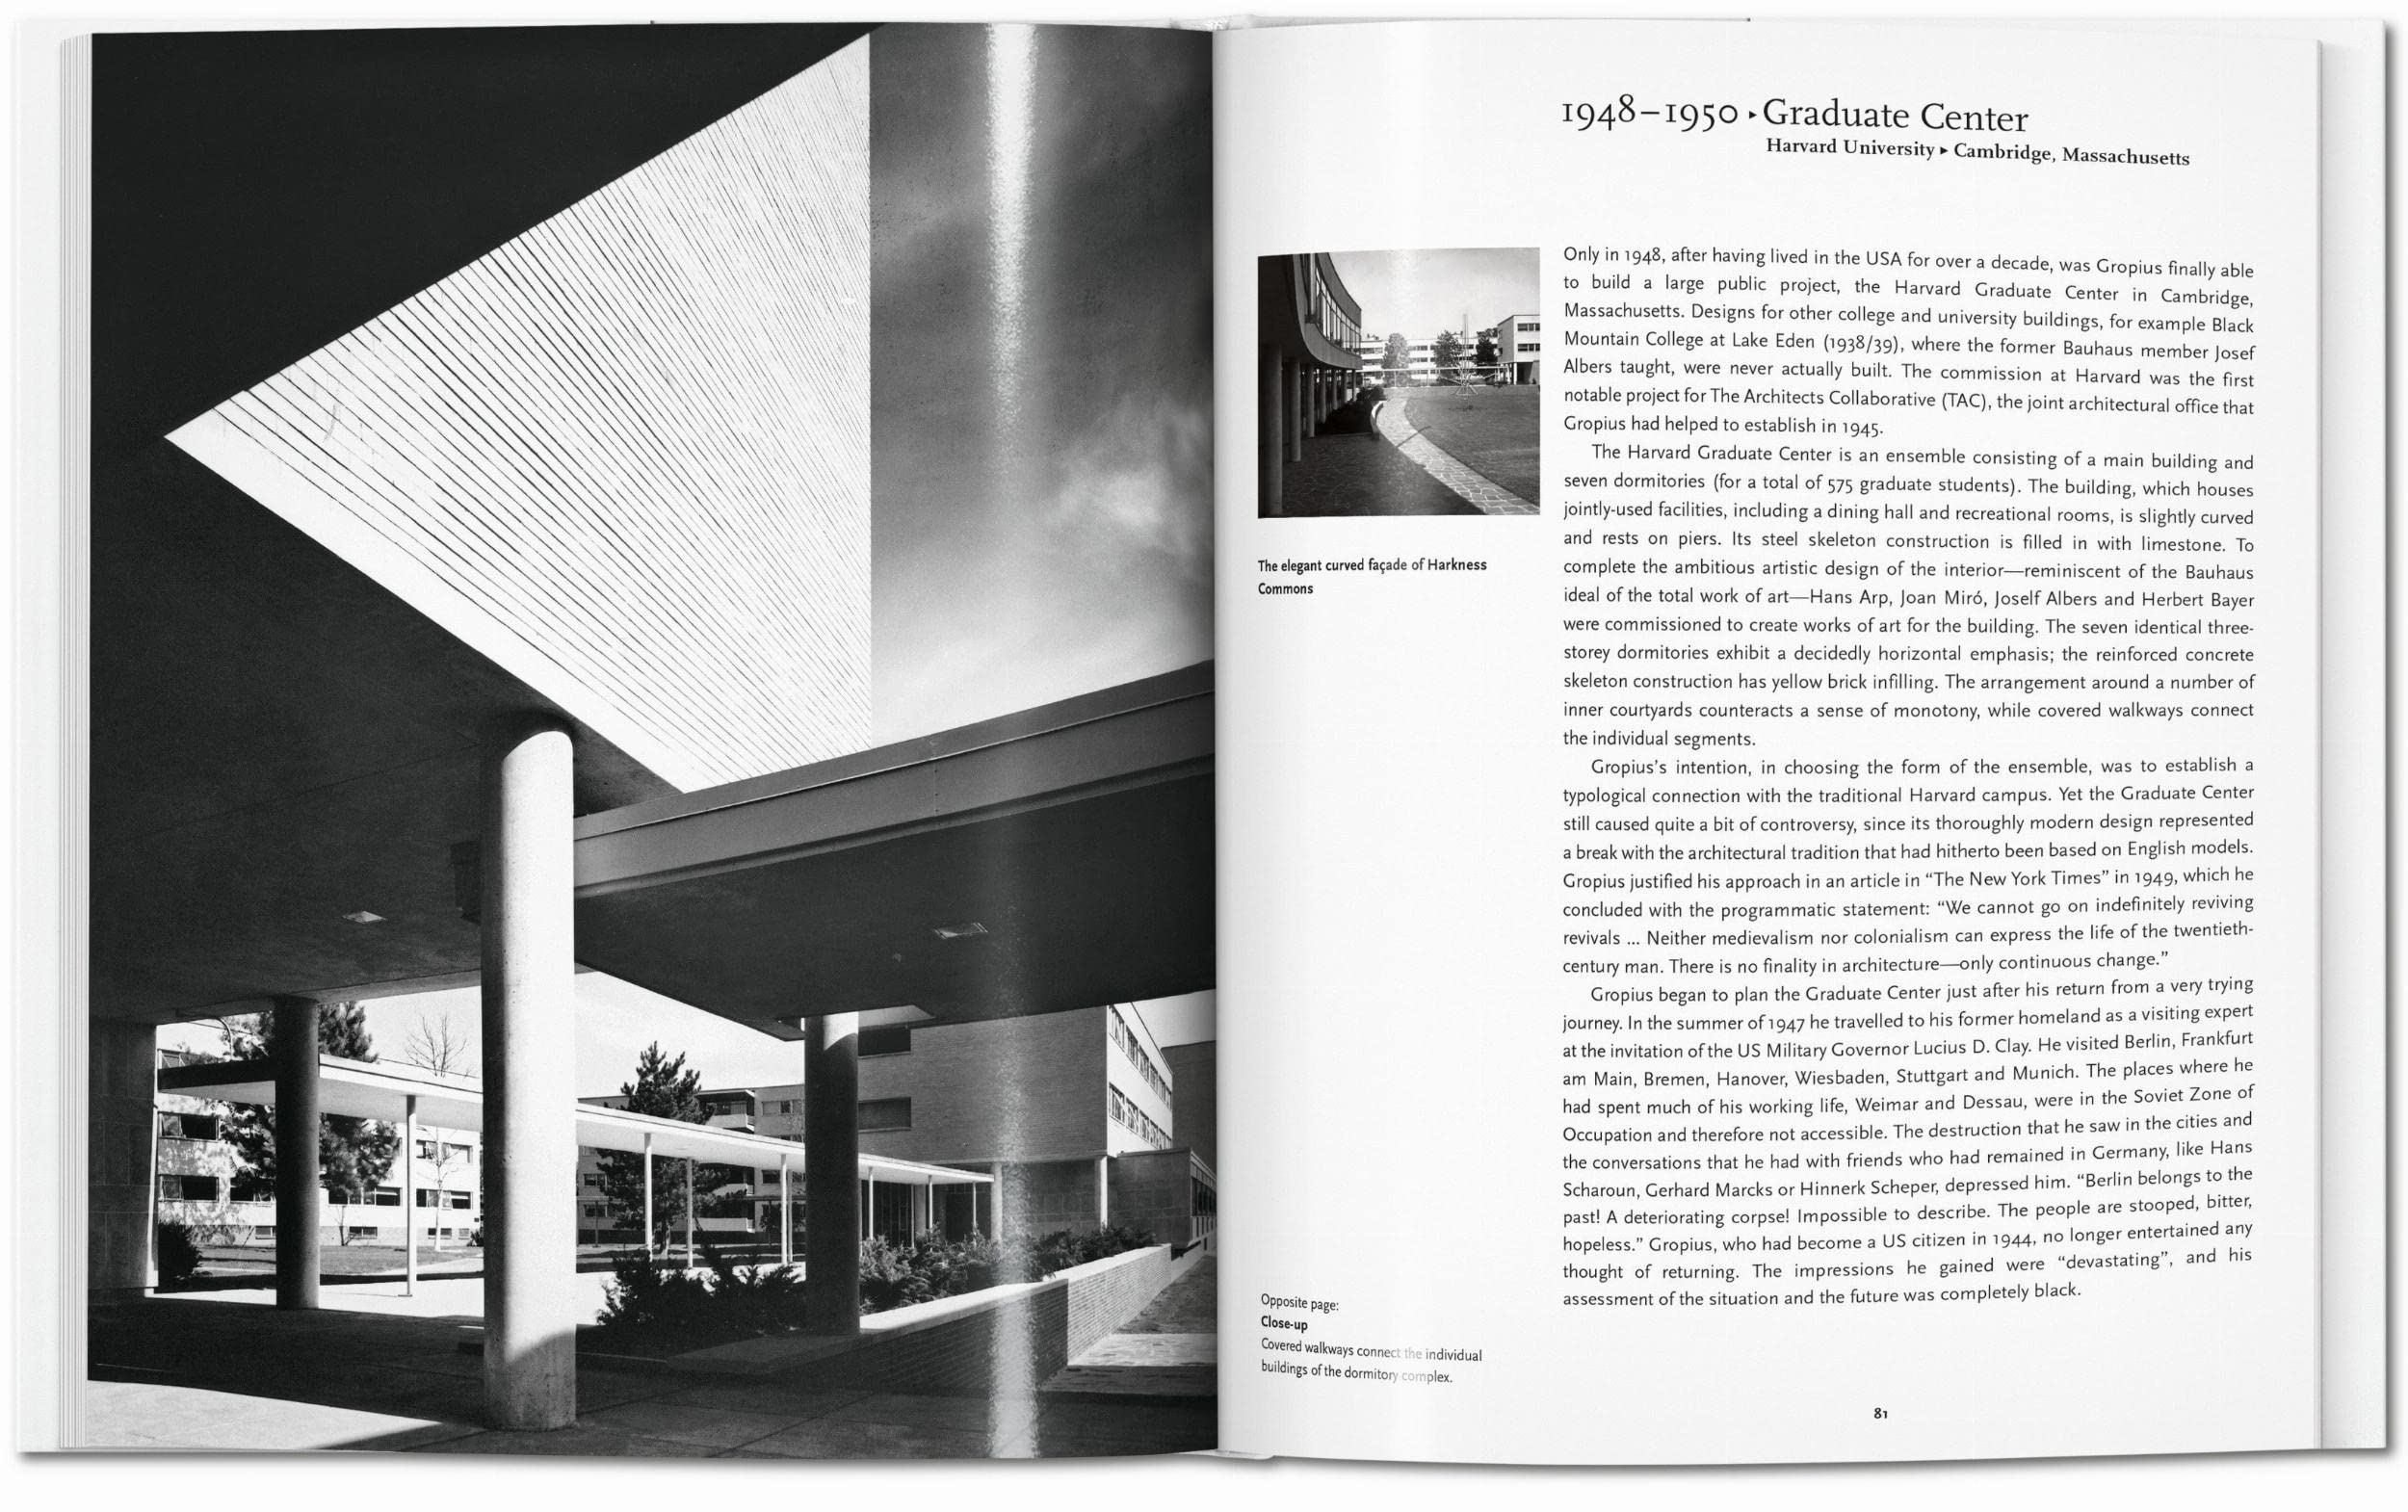 Walter Gropius: 1883-1969: the Promoter of a New Form